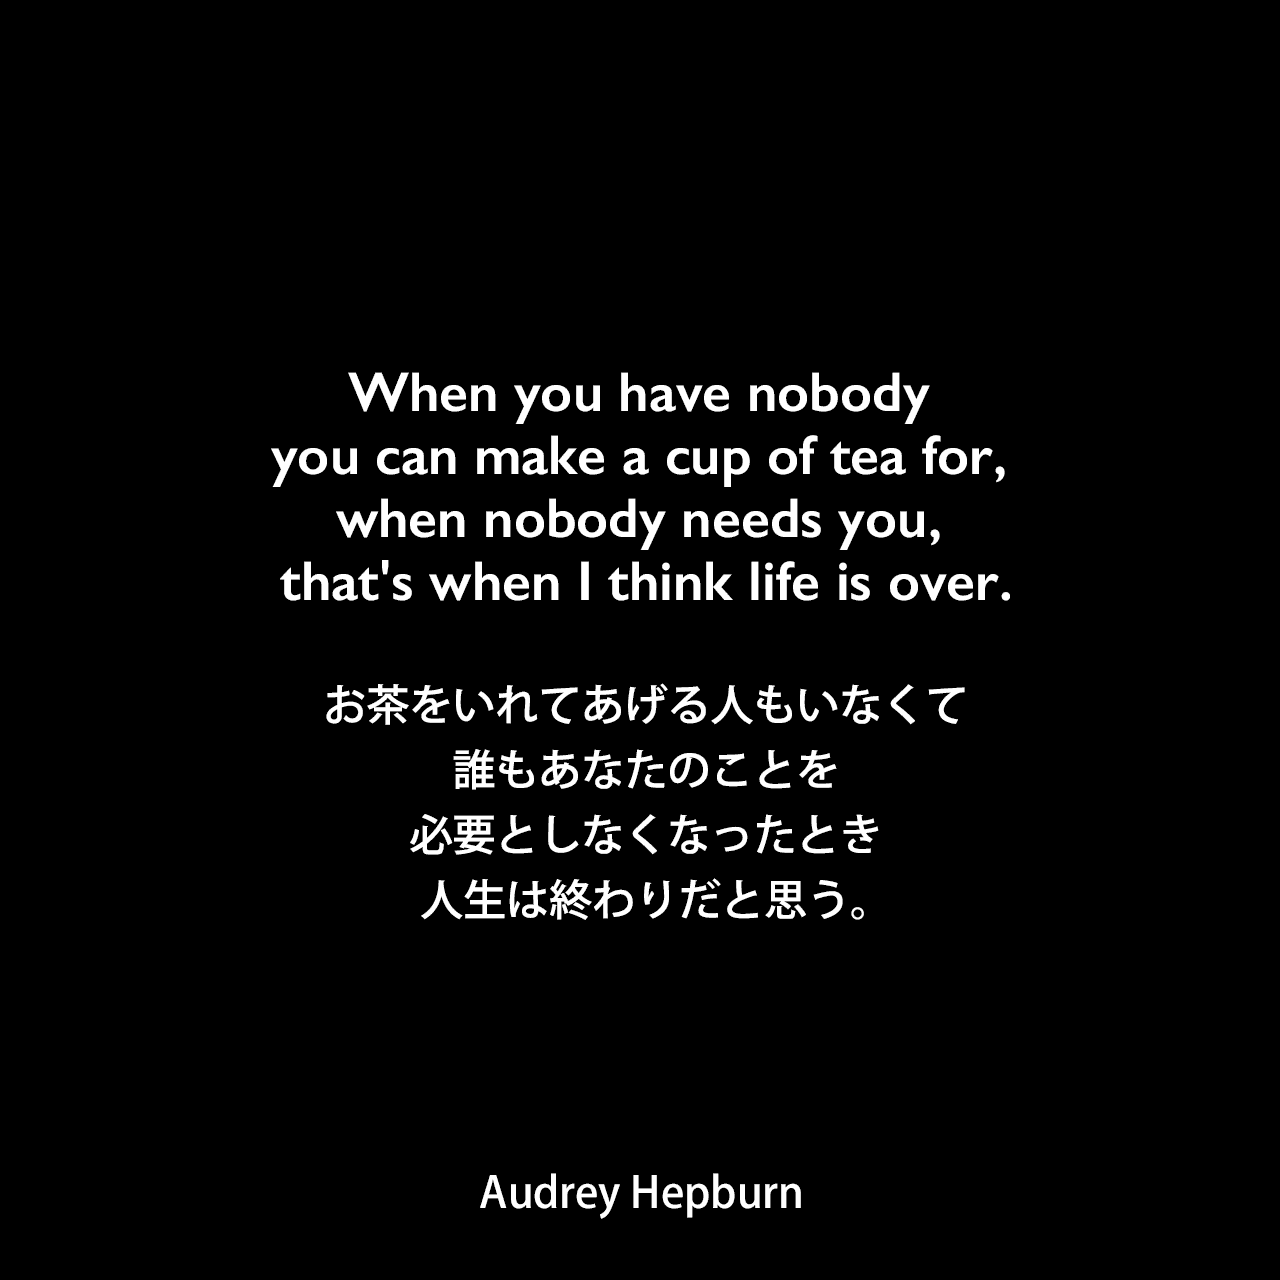 When you have nobody you can make a cup of tea for, when nobody needs you, that's when I think life is over.お茶をいれてあげる人もいなくて、誰もあなたのことを必要としなくなったとき、人生は終わりだと思う。Audrey Hepburn